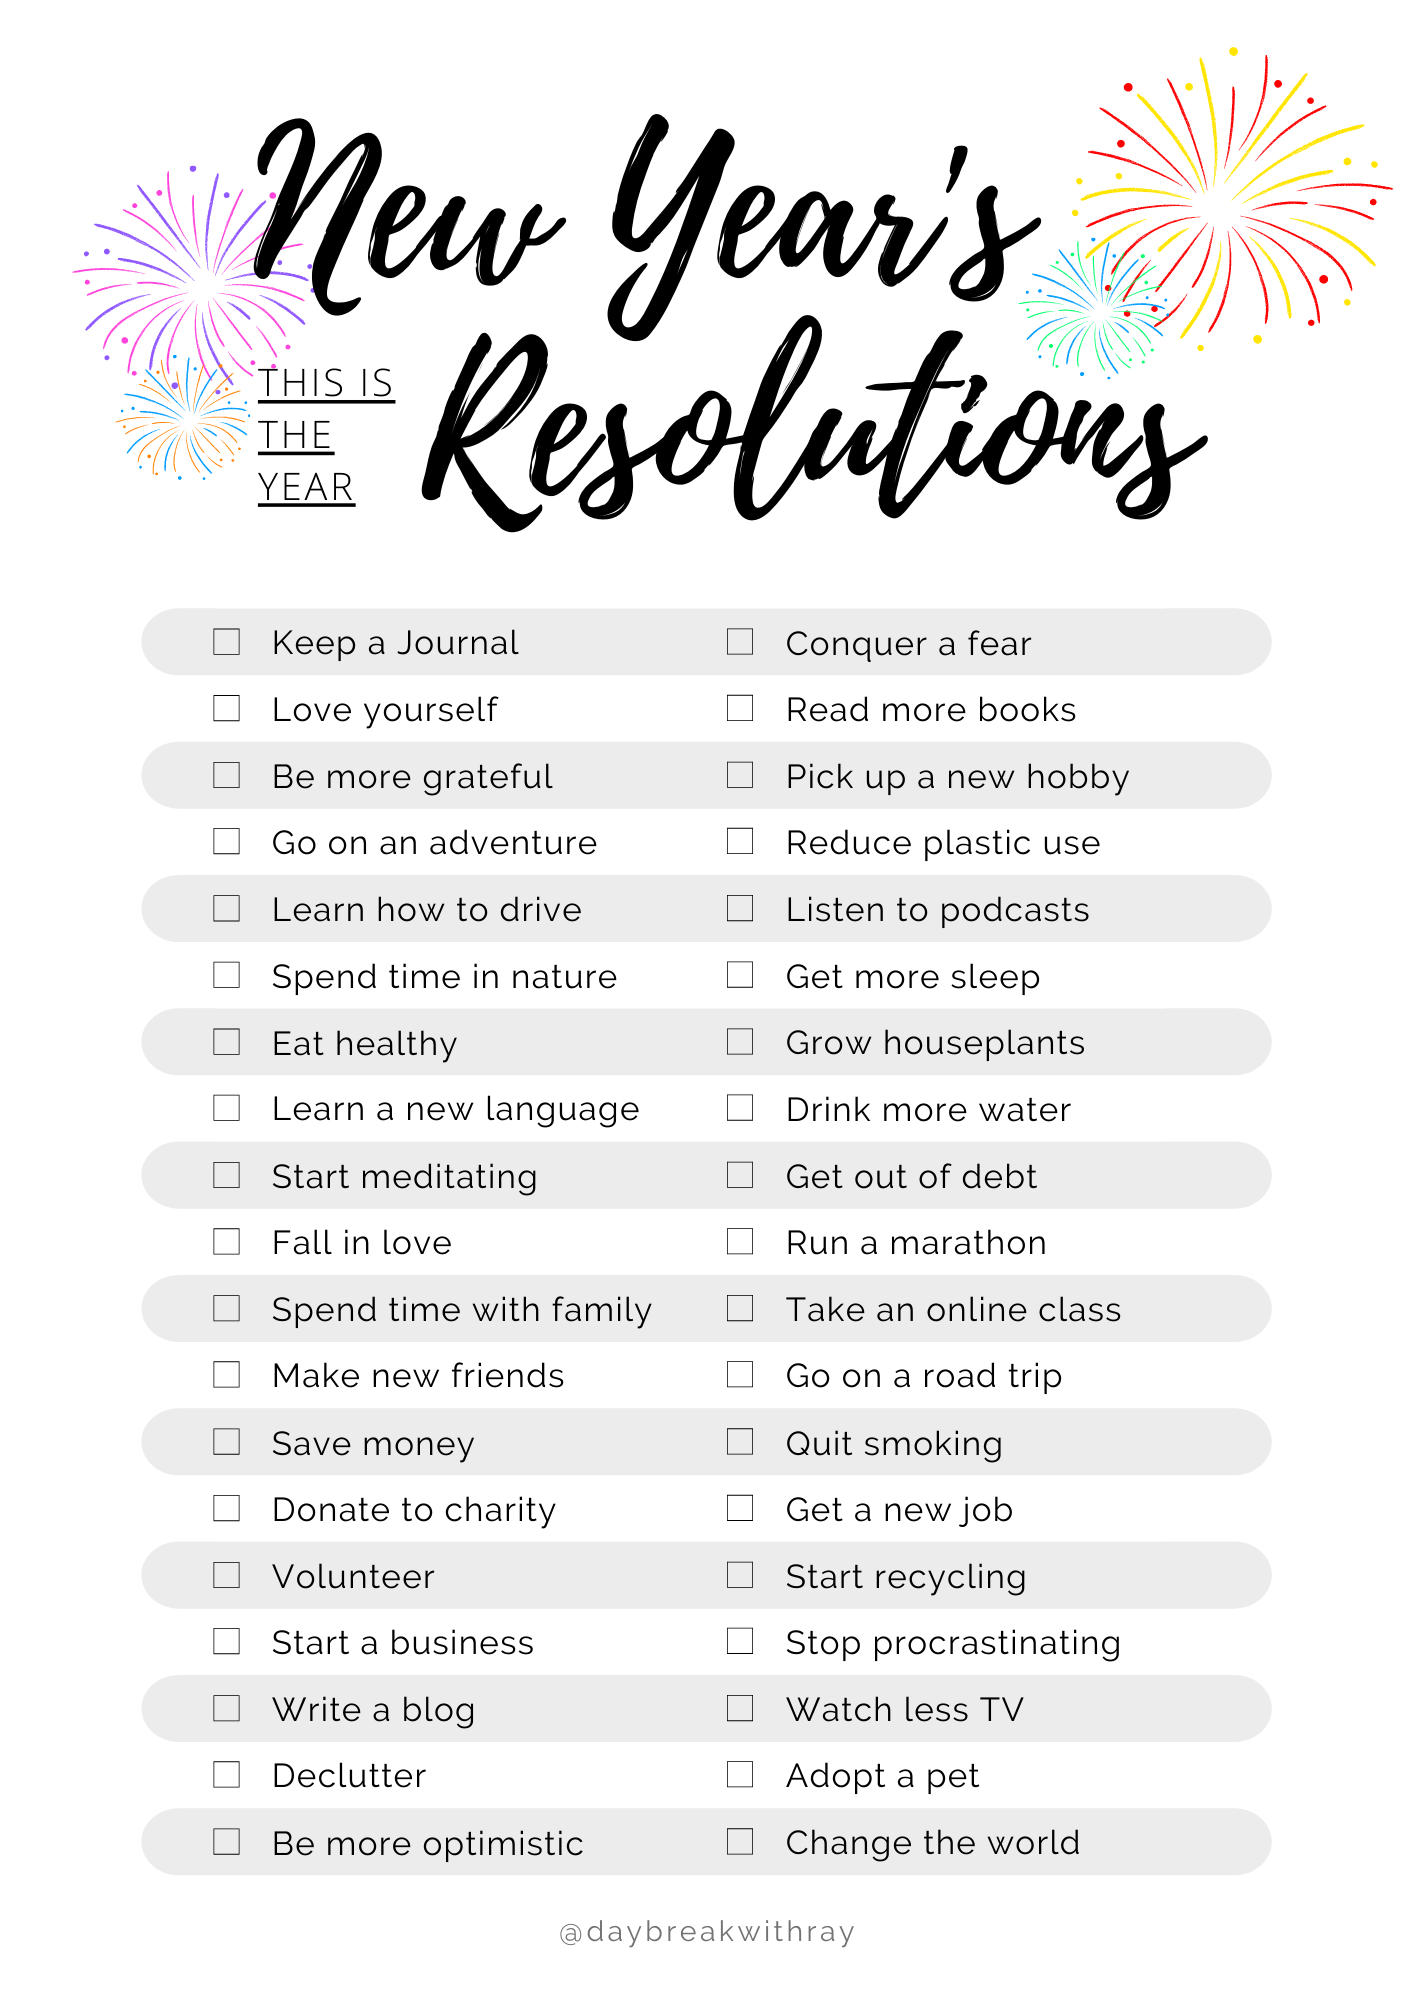 New Year's Resolution Set and Prioritize with the ABCDE Method